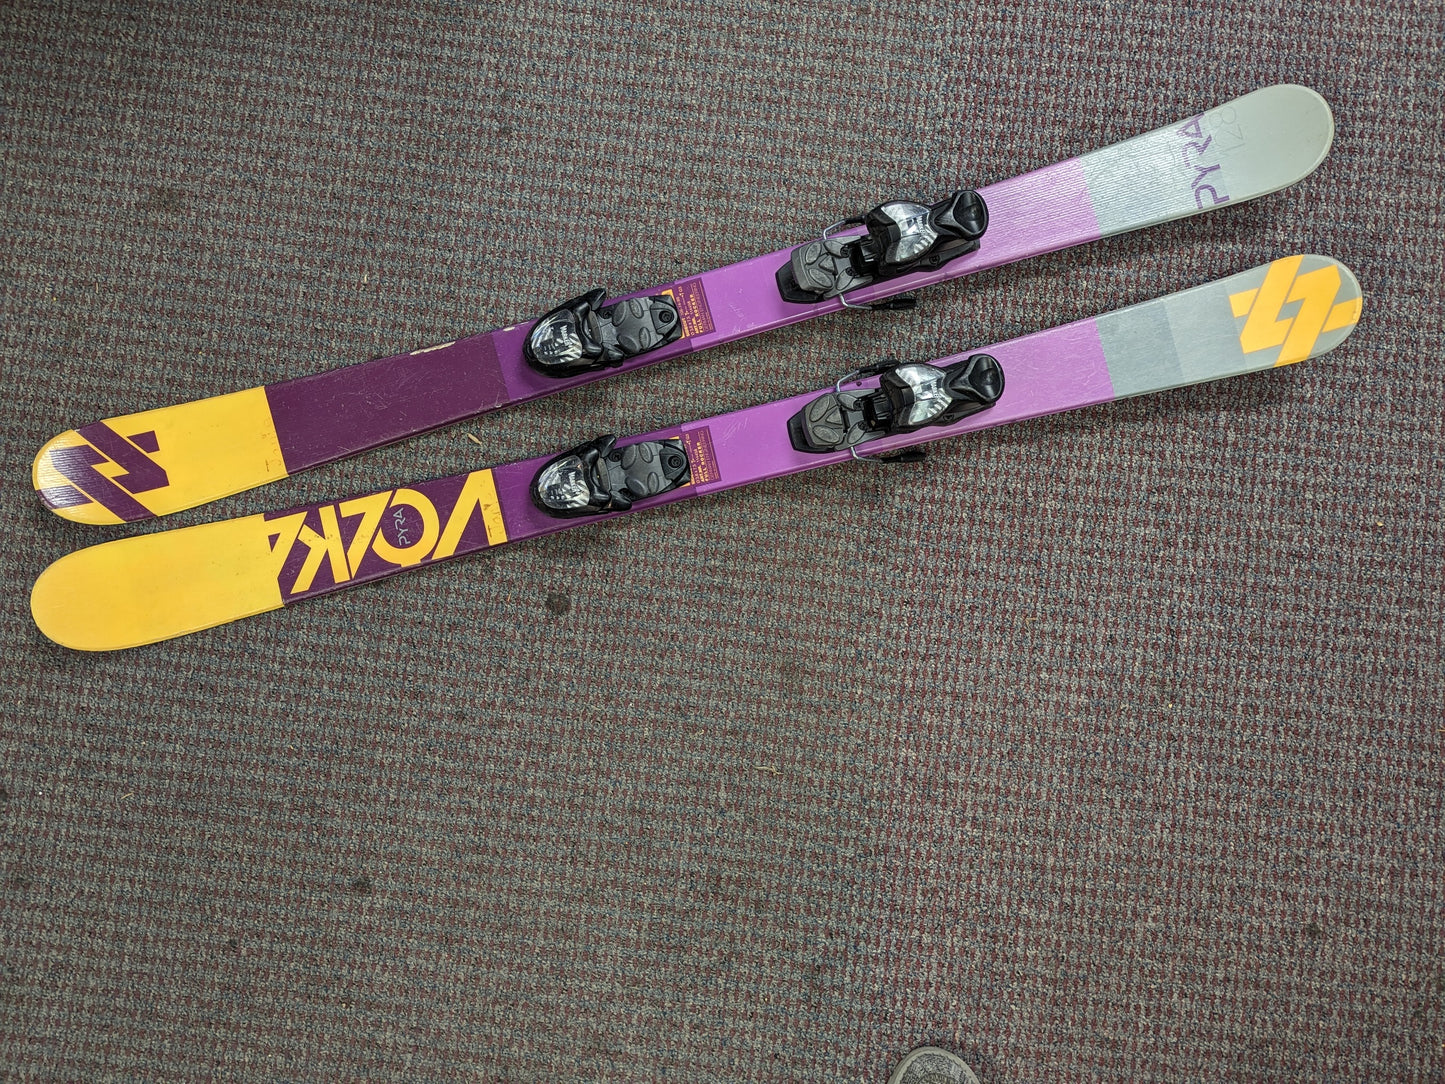 Volkl Pyra Full Rocker Twin Tip Skis w/Marker Bindings Size 128 Cm Color Purple Condition Used